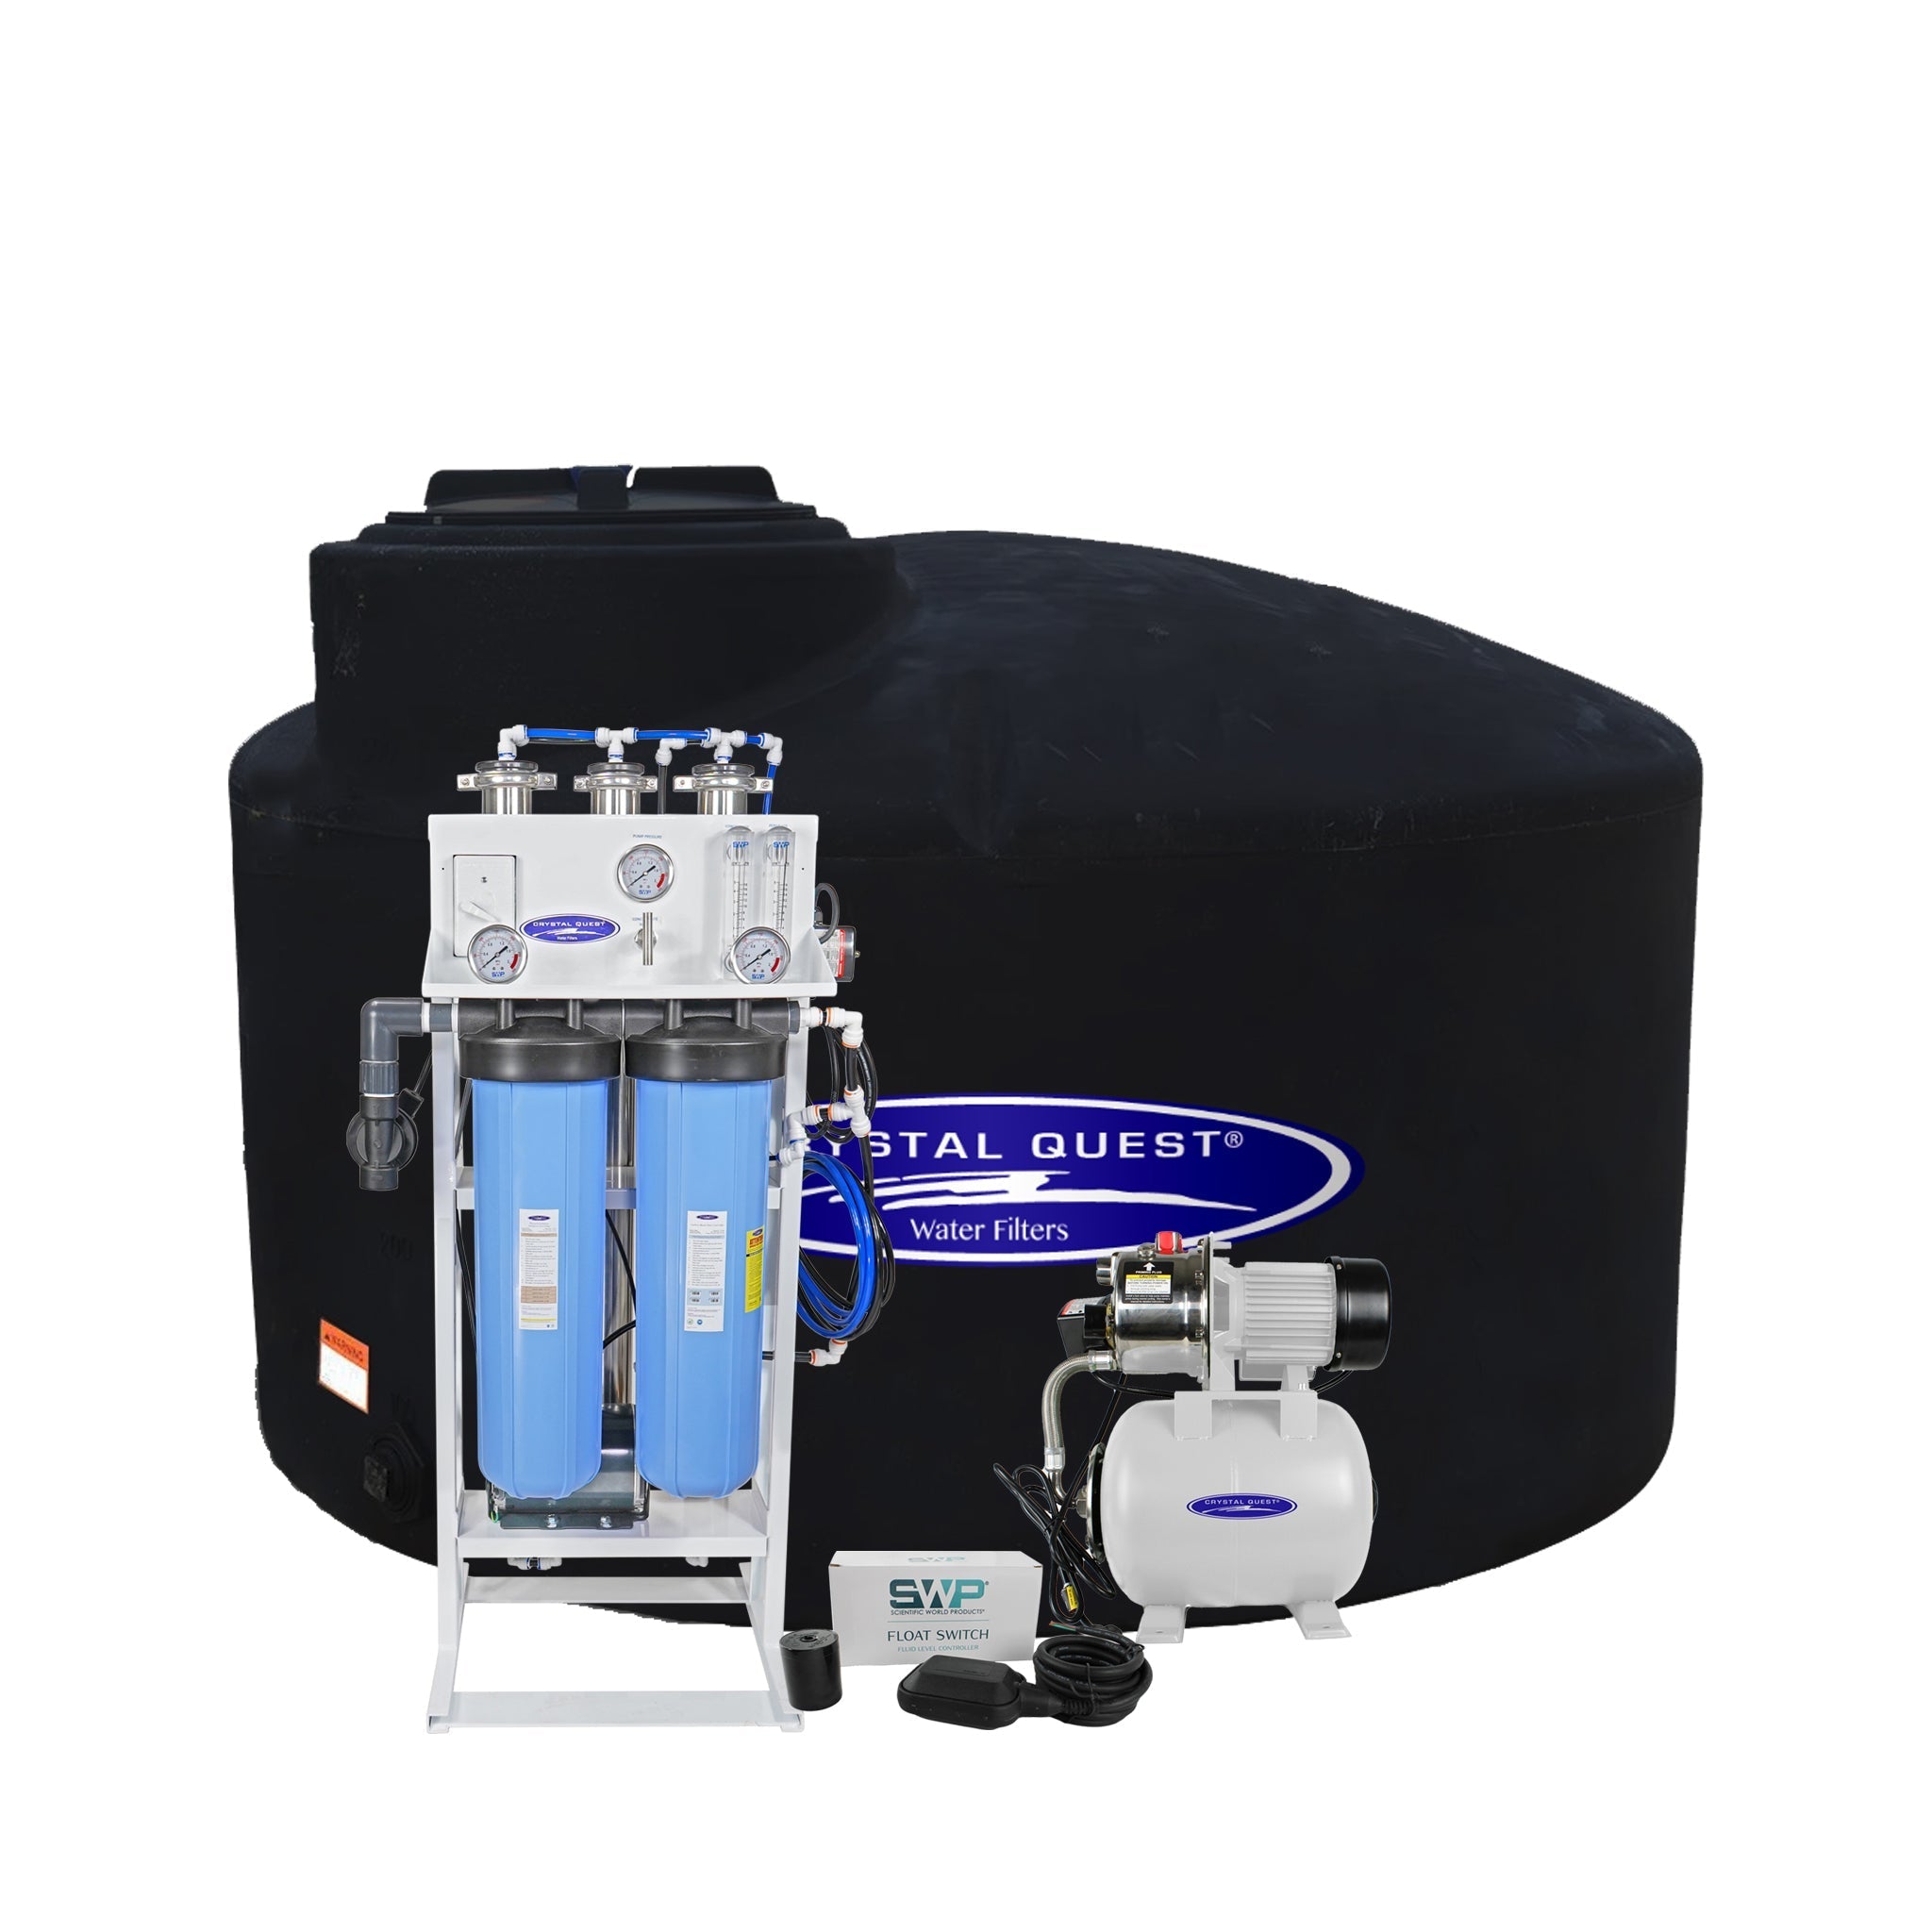 Crystal Quest Whole House Reverse Osmosis System 2500 GPD RO Pump and 550 Gallon Storage Tank